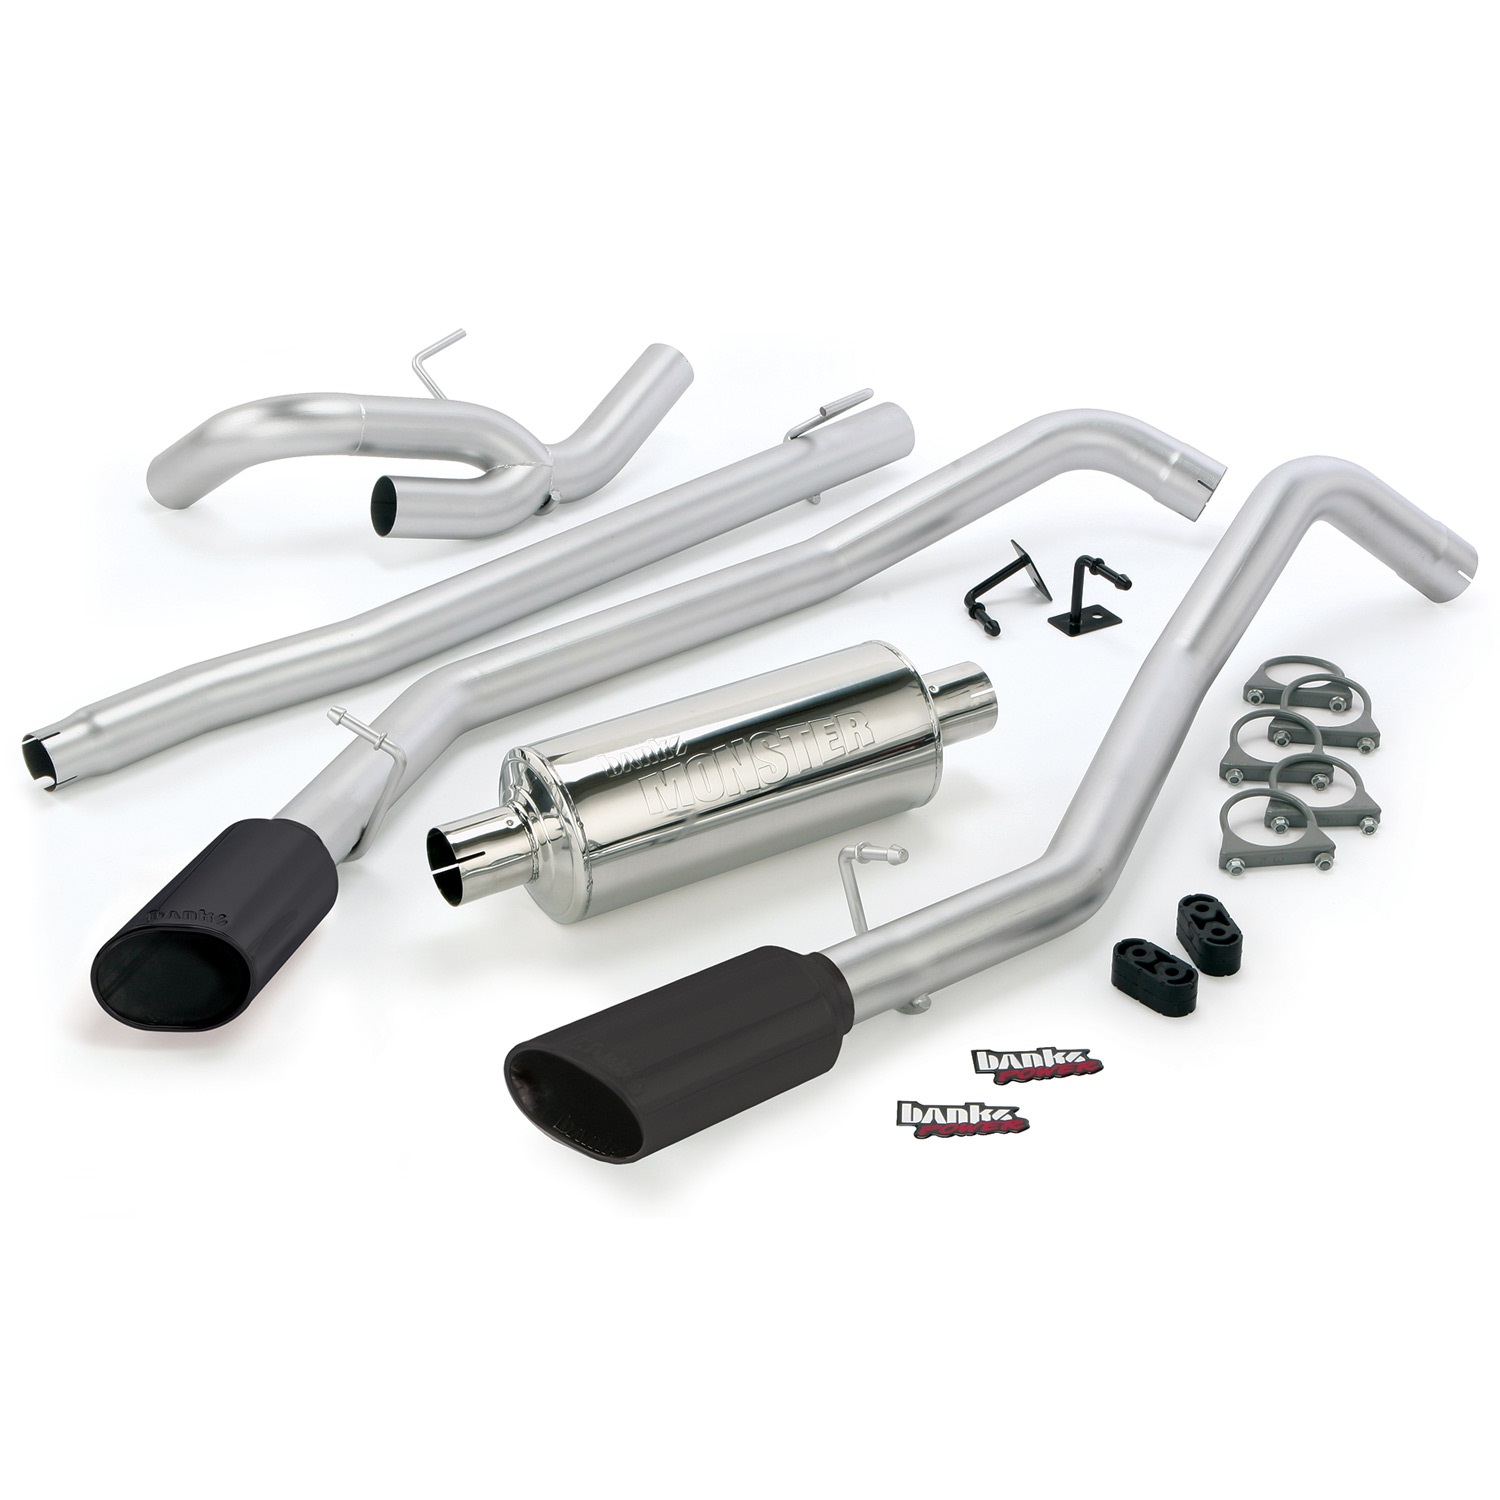 Banks Power 47501-B Dual Monster Exhaust System for 04-08 Ford - Click Image to Close